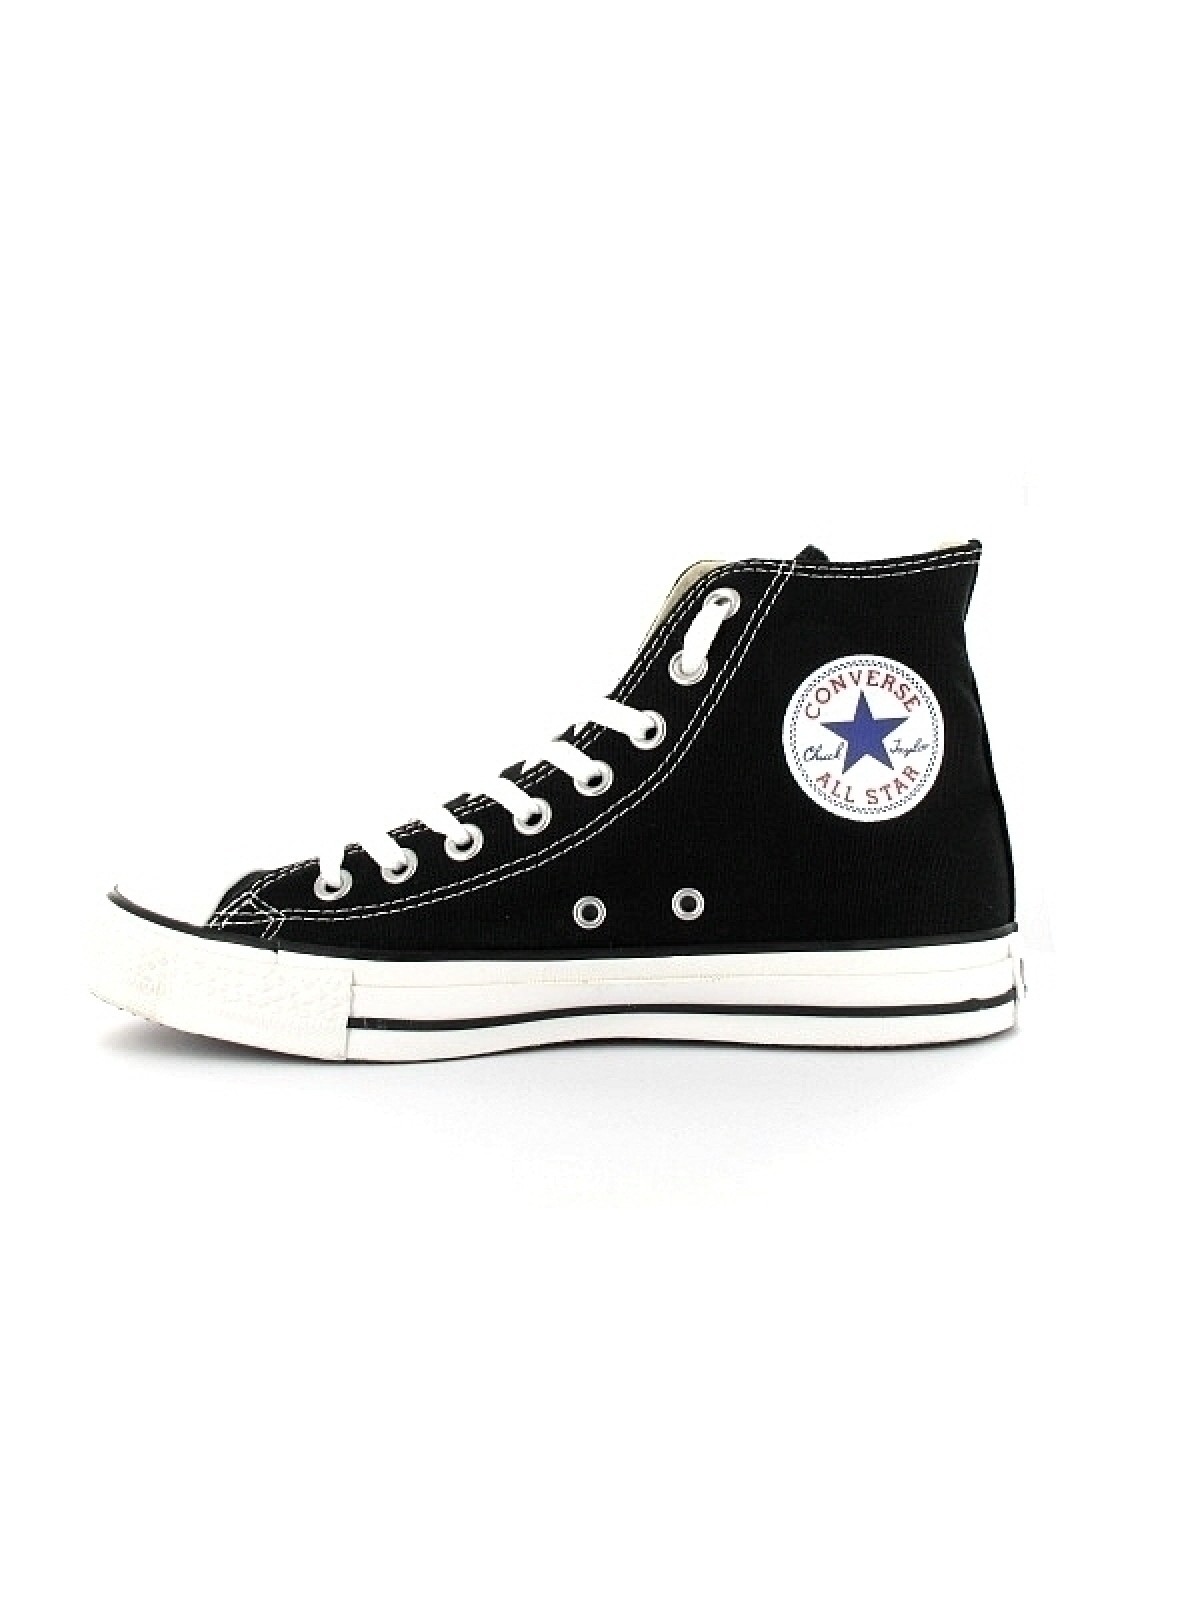 magasin converse limoges